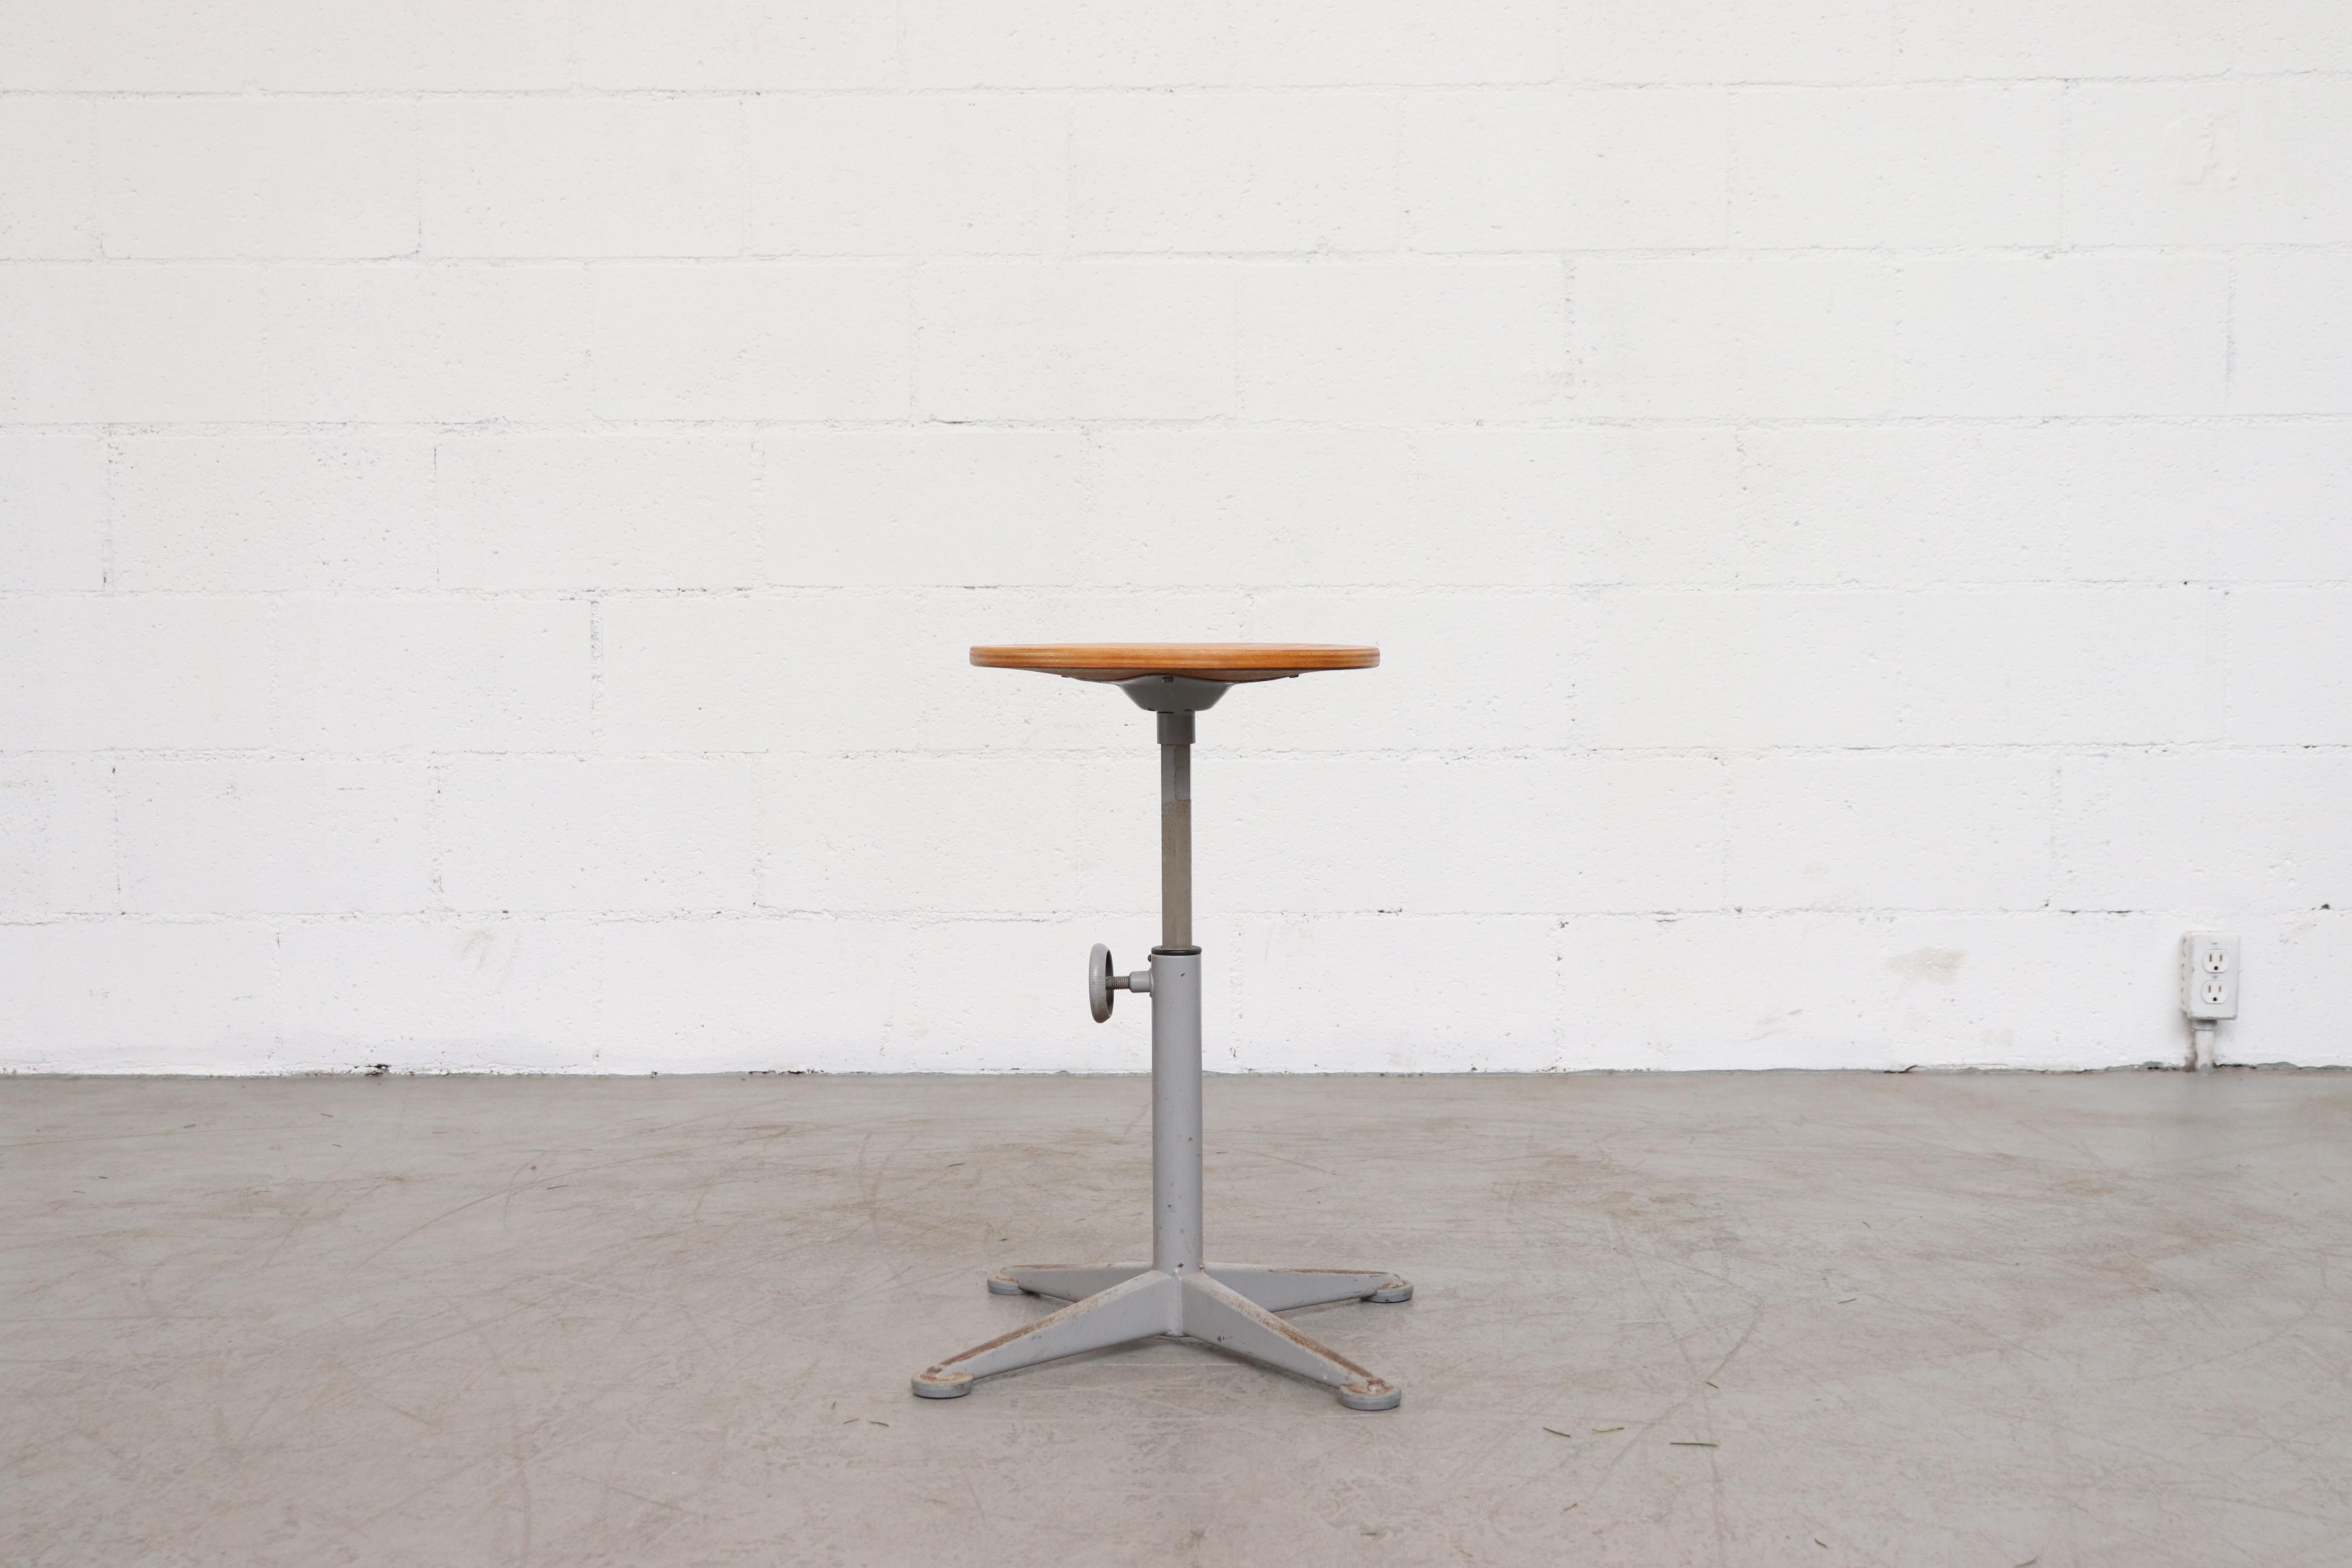 Backless drafting stool by Friso Kramer for Ahrend de Cirkel, plywood seat with small pedestal base. Adjustable height with original knob. Visible wear to the enamel and plywood. In original condition.